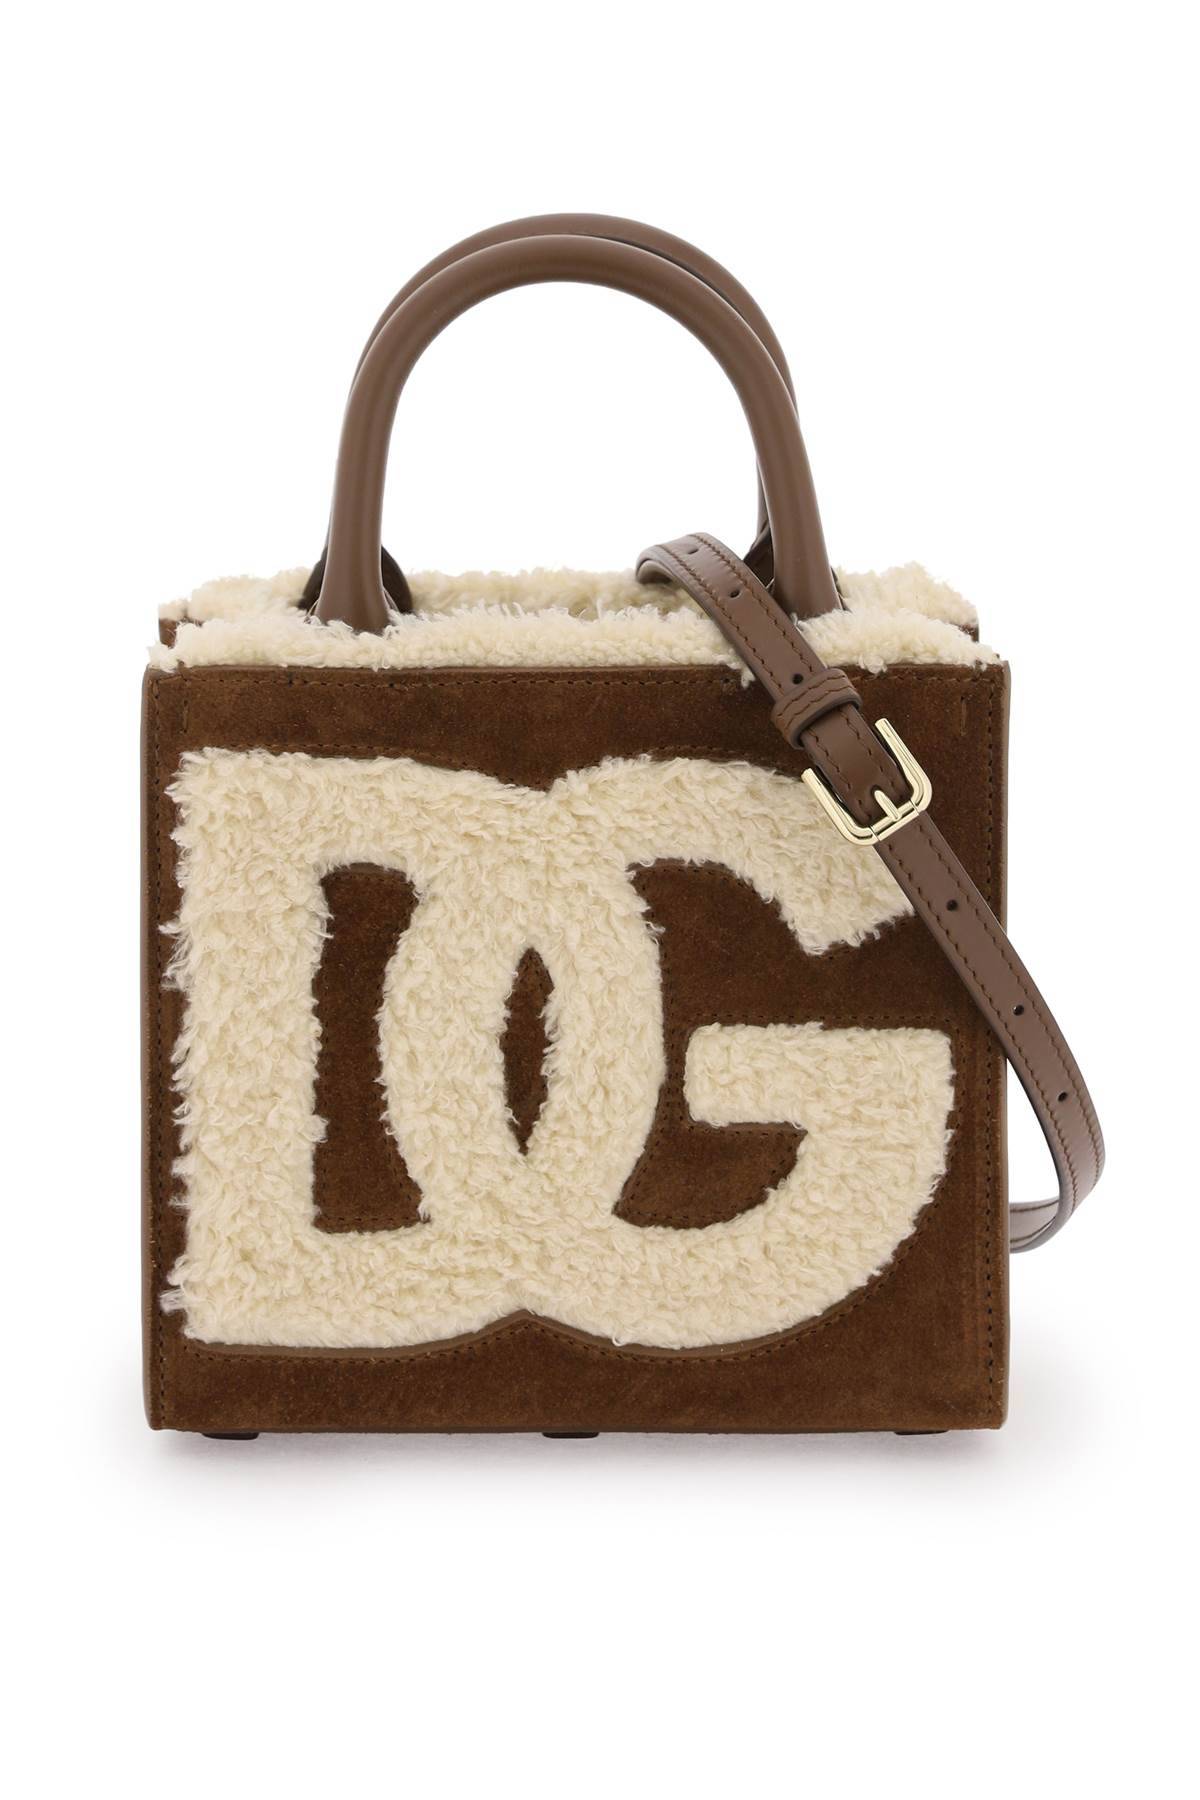 Dolce & Gabbana Dg Daily Mini Suede And Shearling Tote Bag In Beige,brown